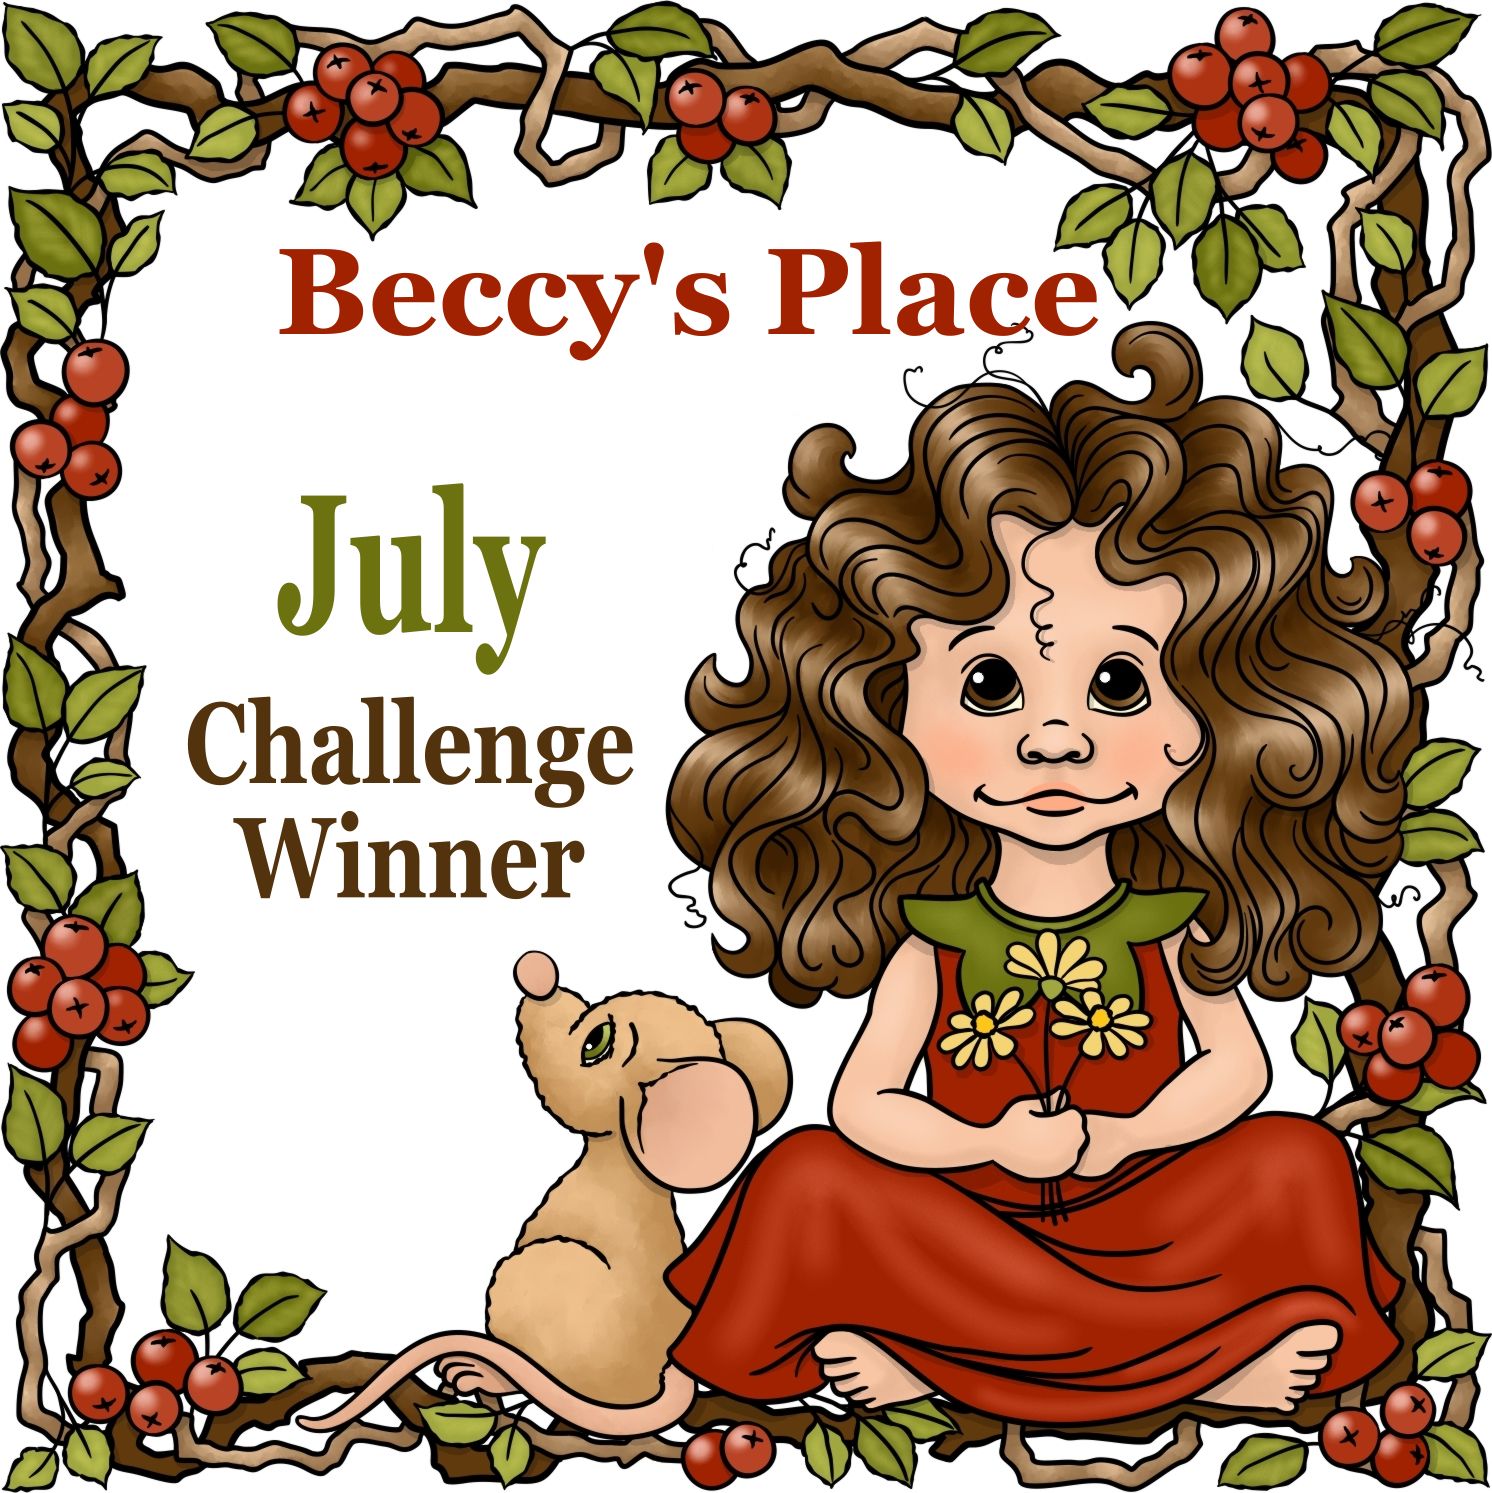 July Challenge Winner at Beccy's Place